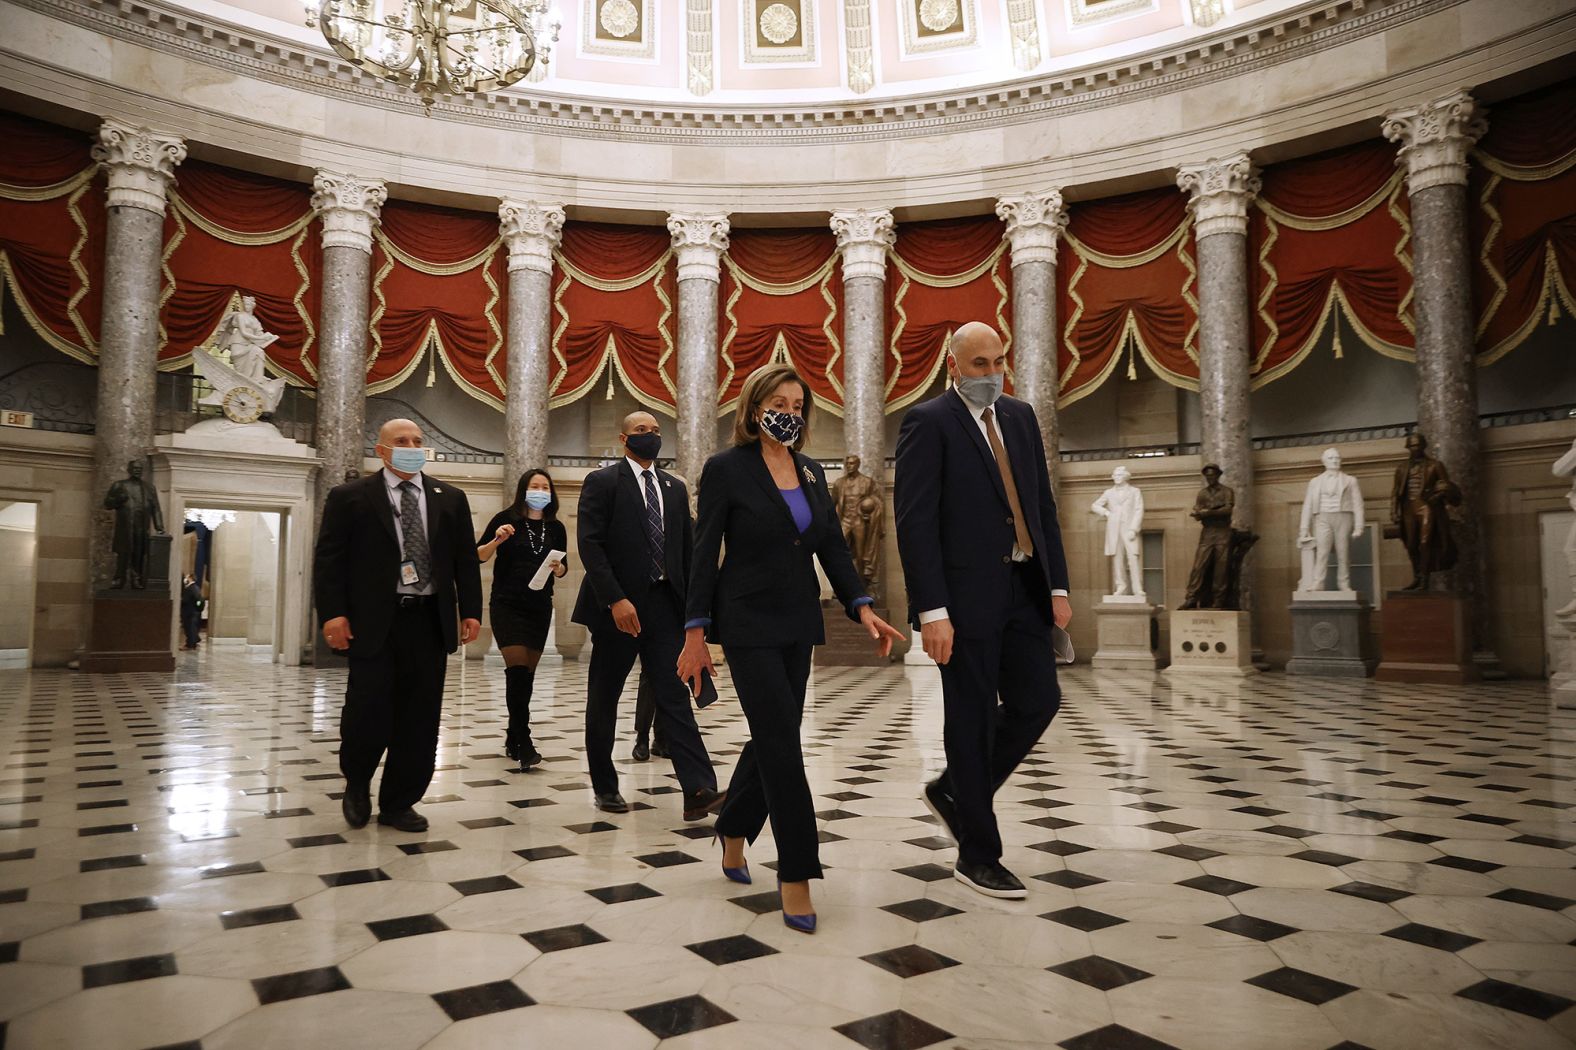 Pelosi heads to the House chamber for the last vote of the day on January 12. The House approved a resolution urging Vice President Mike Pence to <a href="https://www.cnn.com/2021/01/12/politics/house-vote-25th-amendment-trump/index.html" target="_blank">invoke the 25th Amendment</a> to remove Trump from power, but Pence sent a letter ahead of the vote saying he would not do so.